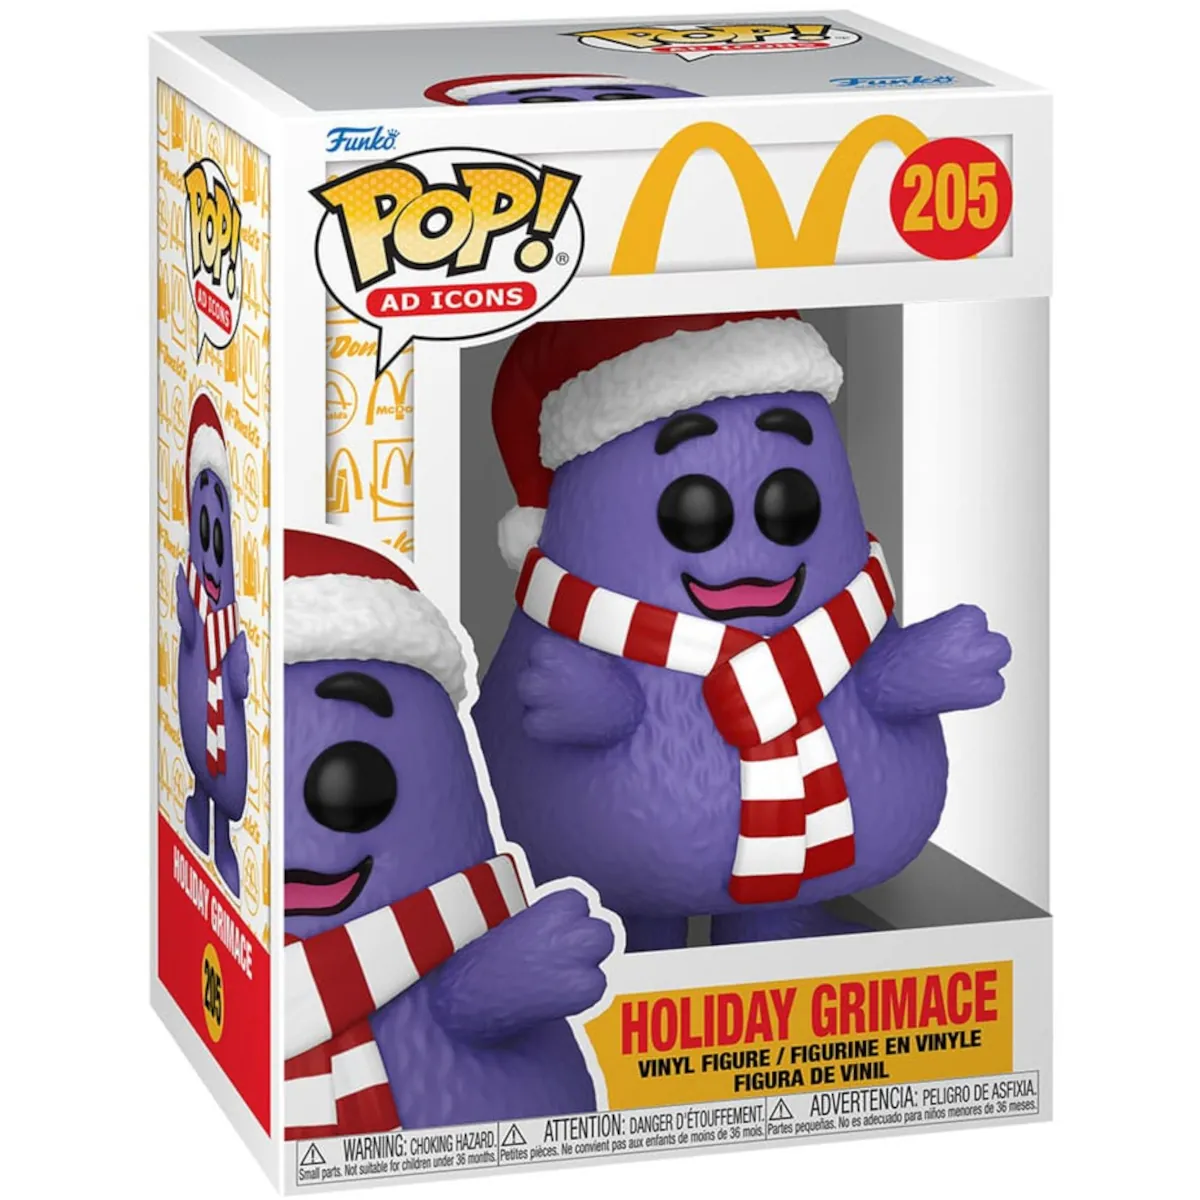 74065 Funko Pop Ad Icons McDonalds Holiday Grimace Collectable Vinyl Figure Front